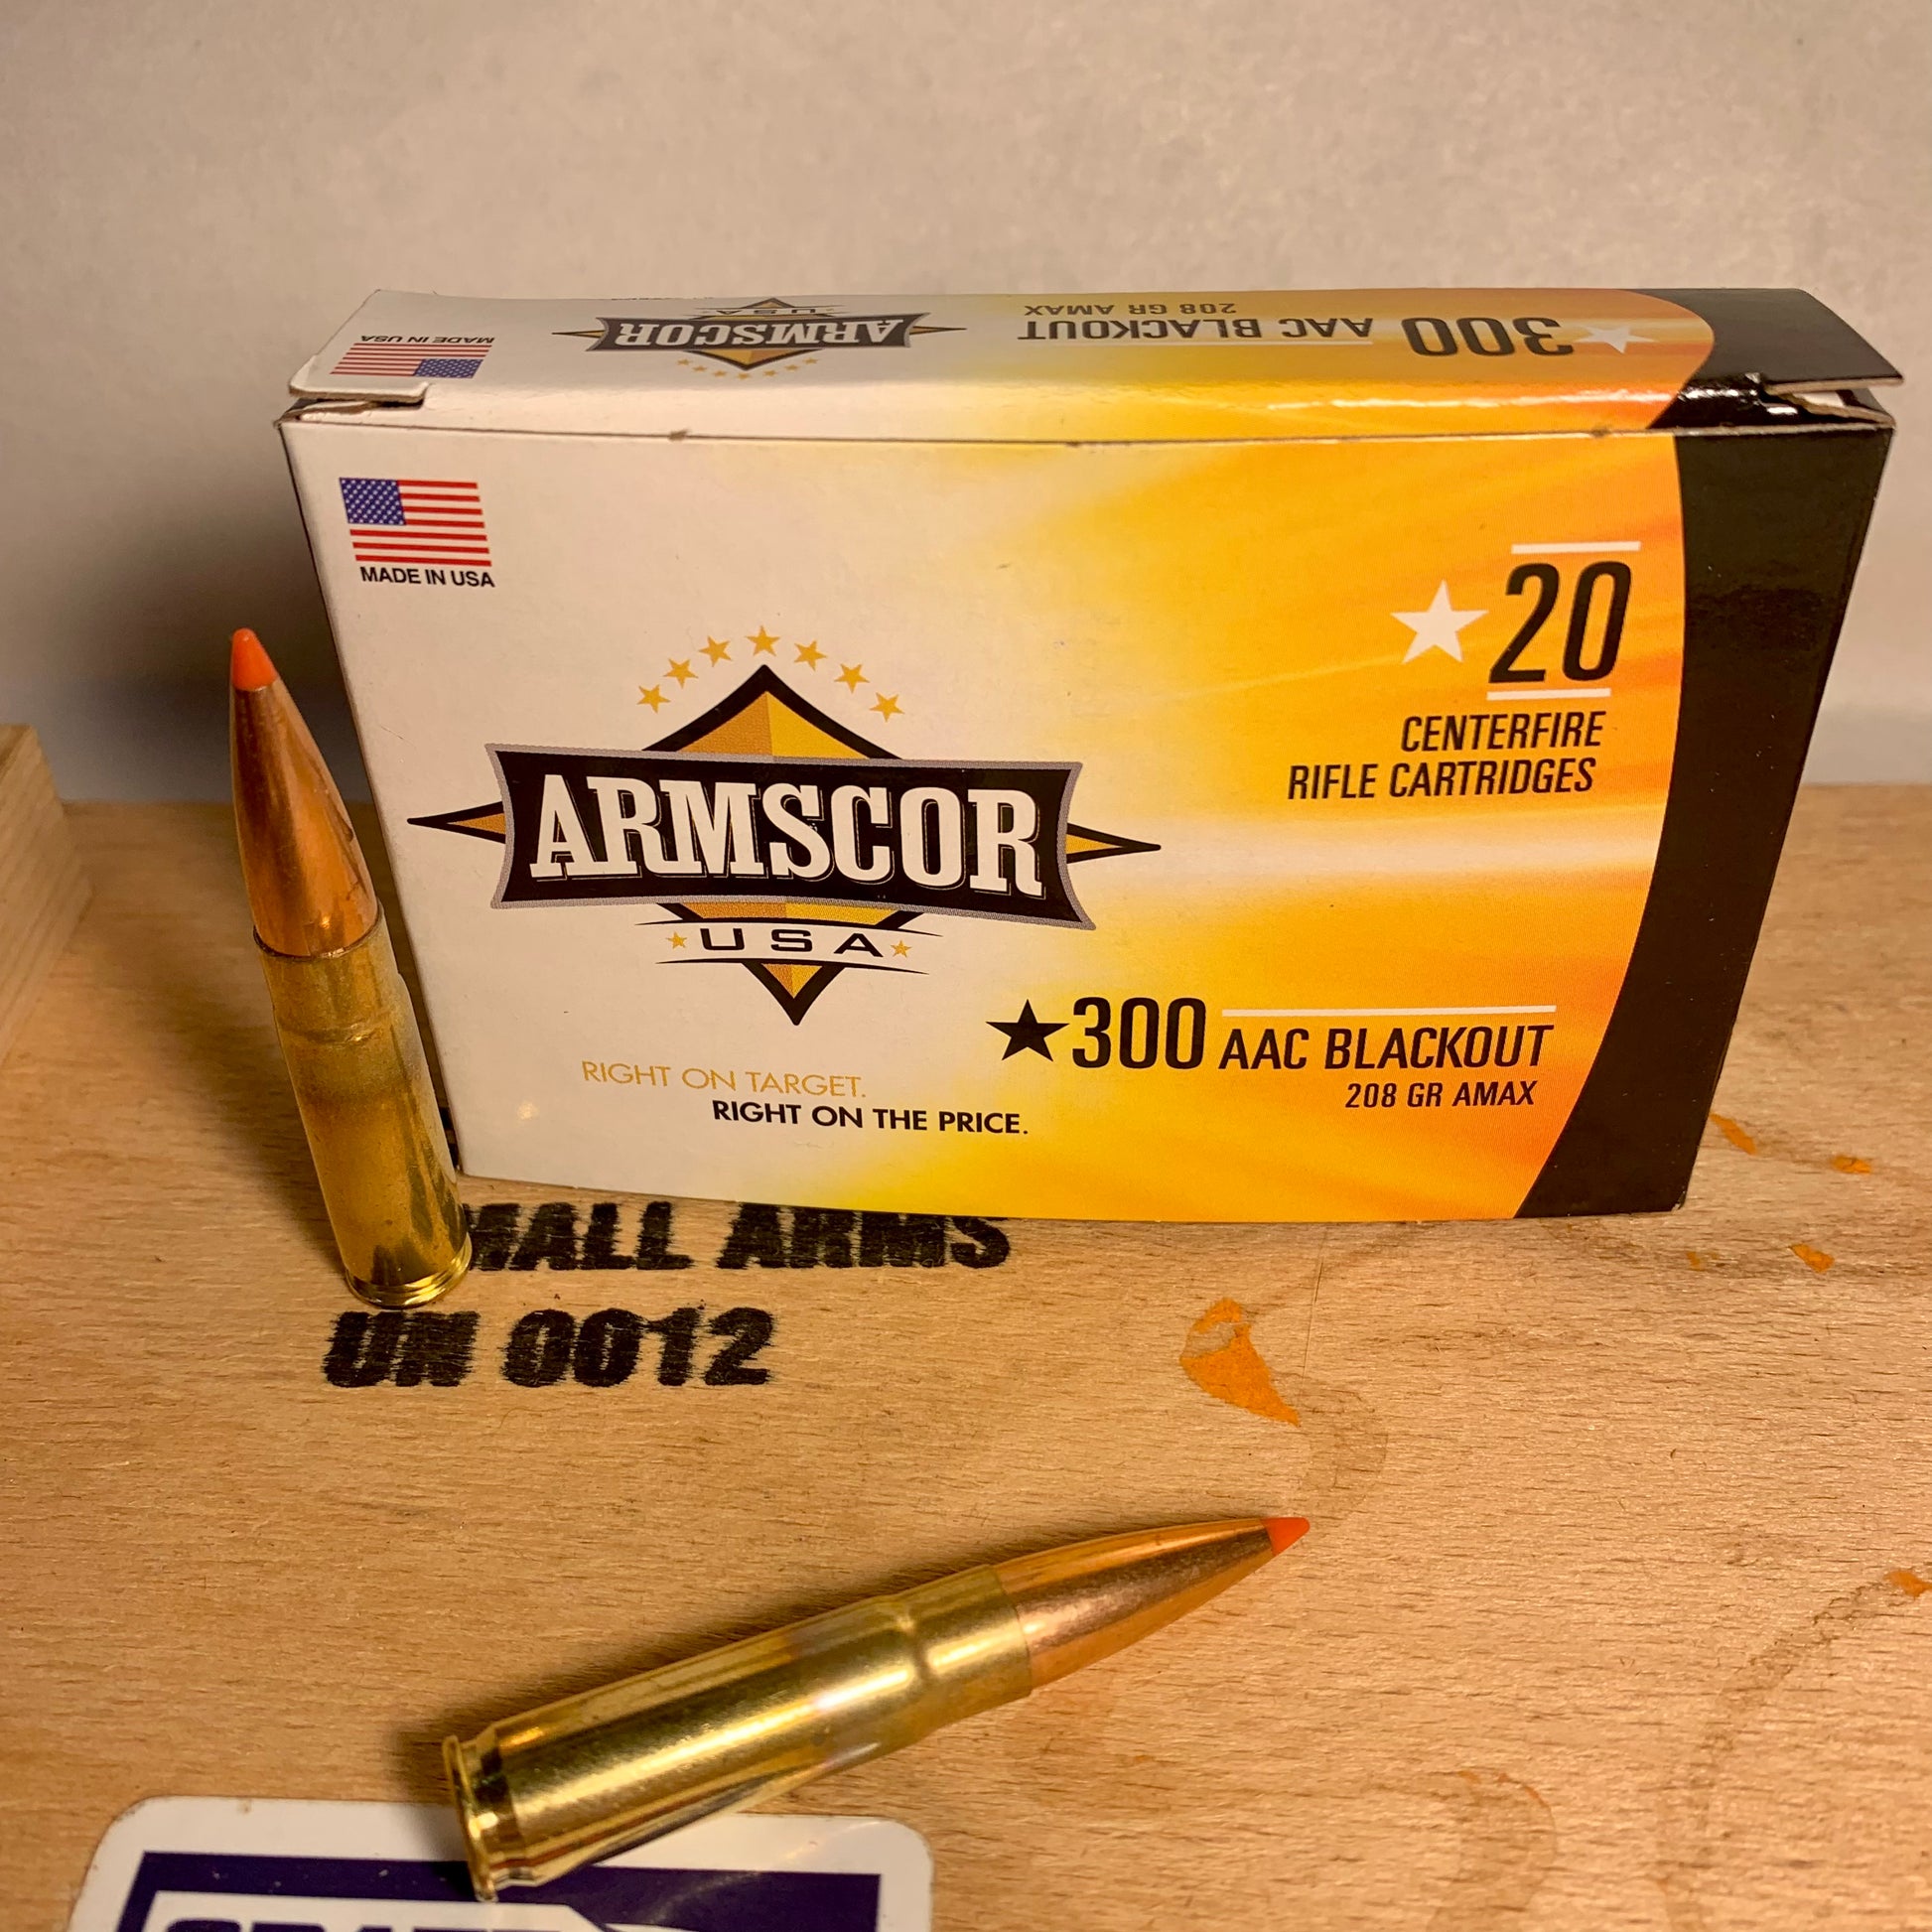 20 Round Box Armscor .300 AAC Blackout Ammo 208gr A-MAX - Subsonic